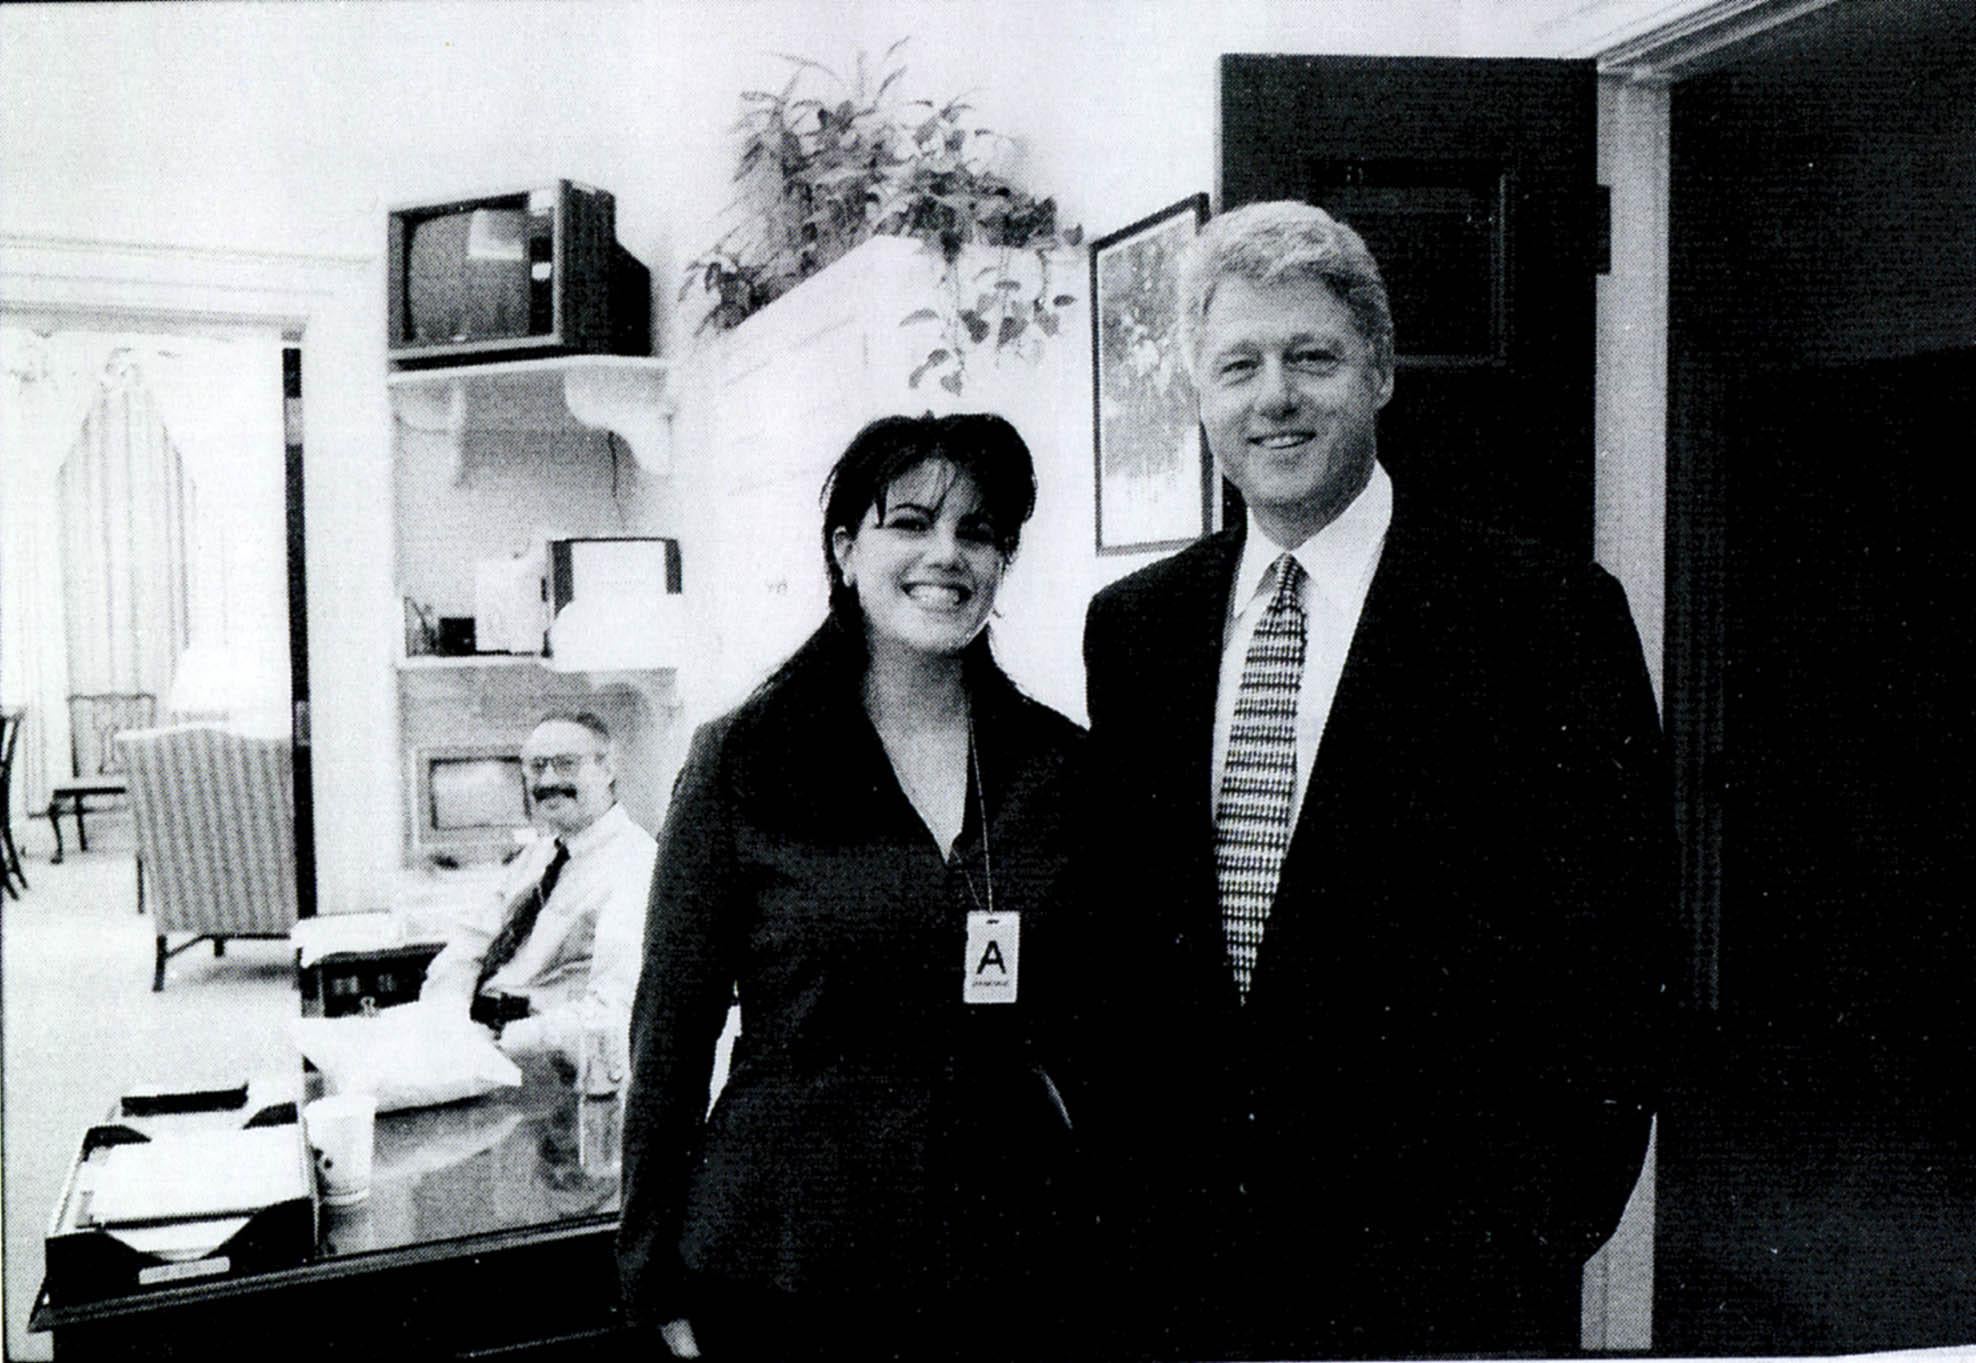 Monica Lewinksy, a former White House intern, was overwhelmed by the investigation of her liaison with Bill Clinton